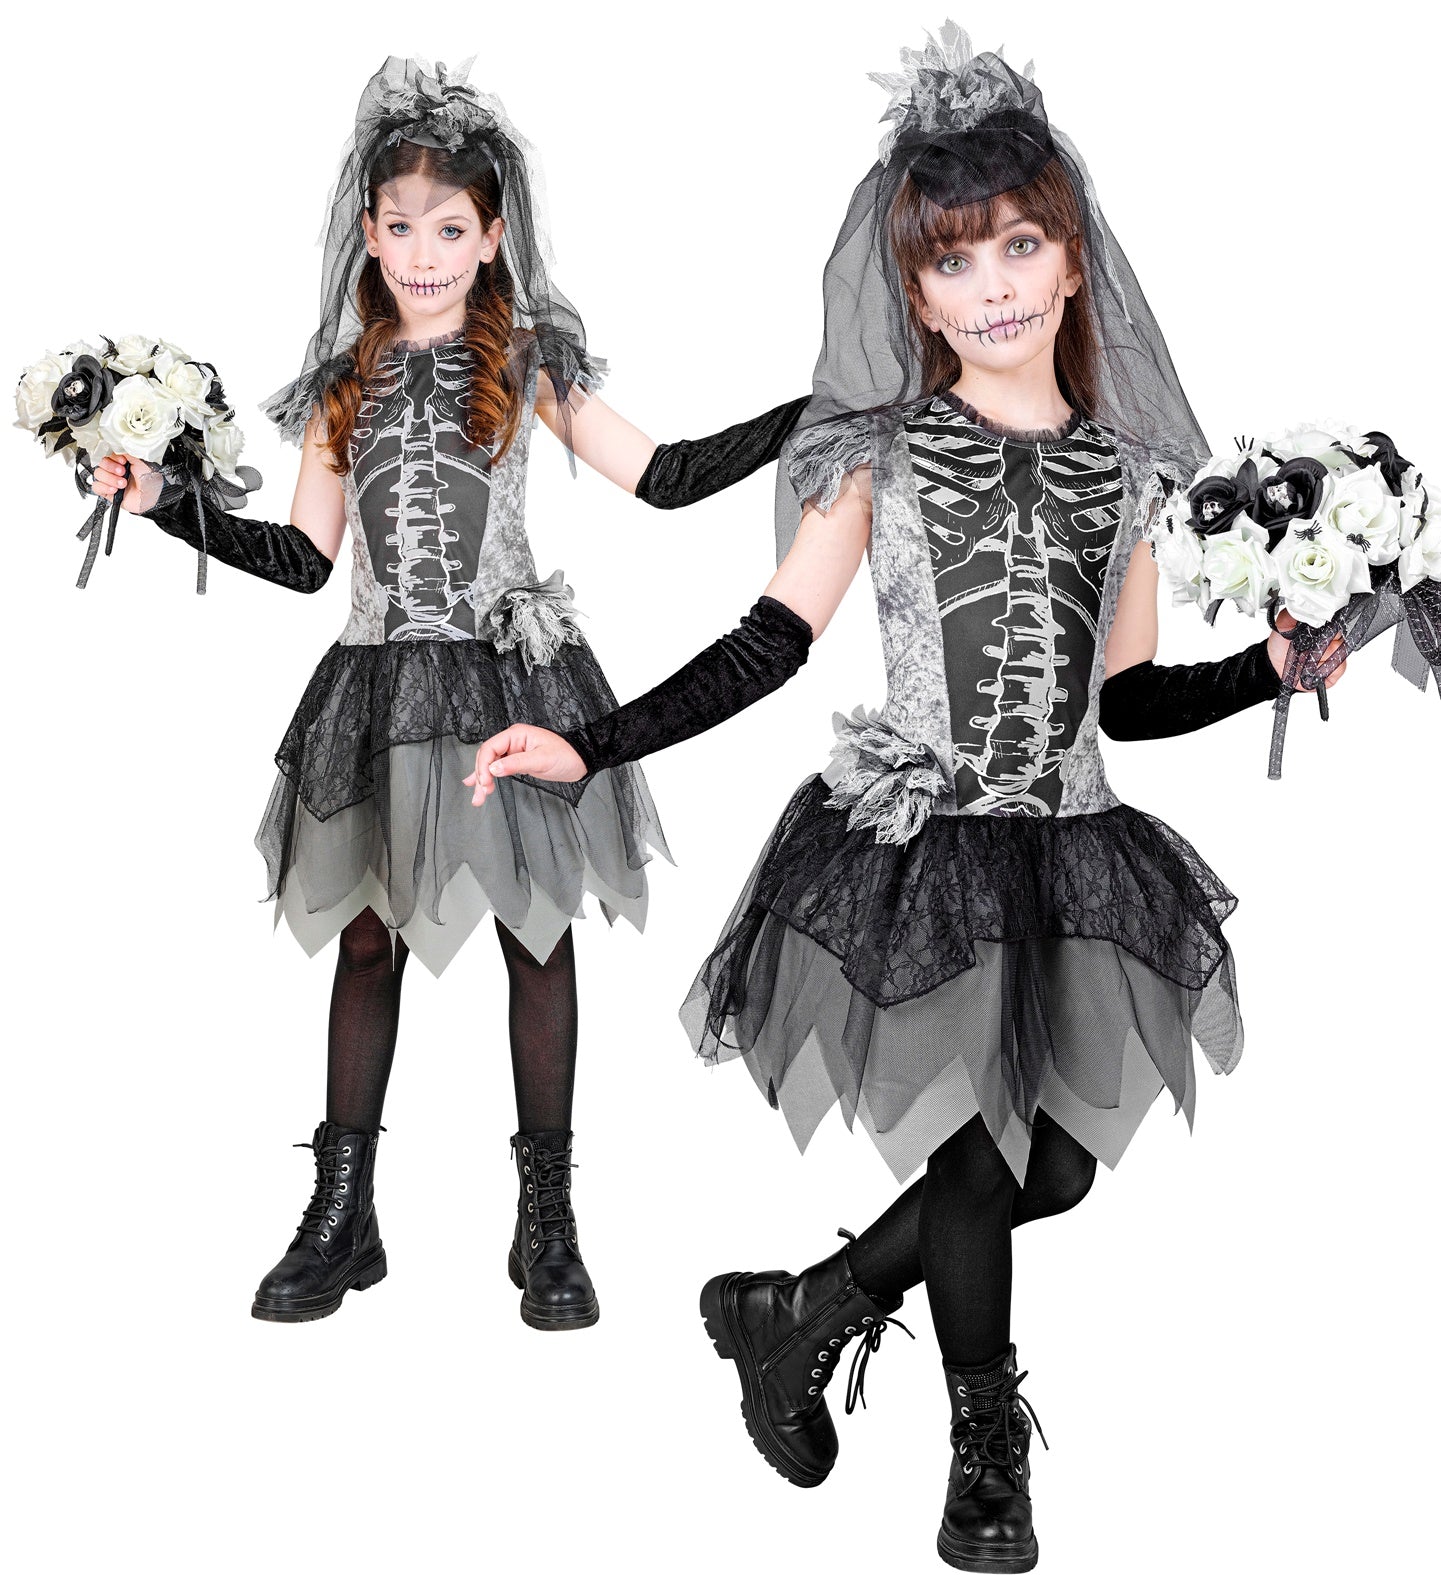 Custom-Made-Black-Vampire-Costume-For-Halloween-Gothic-Corset-Dresses-With-Long-Sleeves-L…